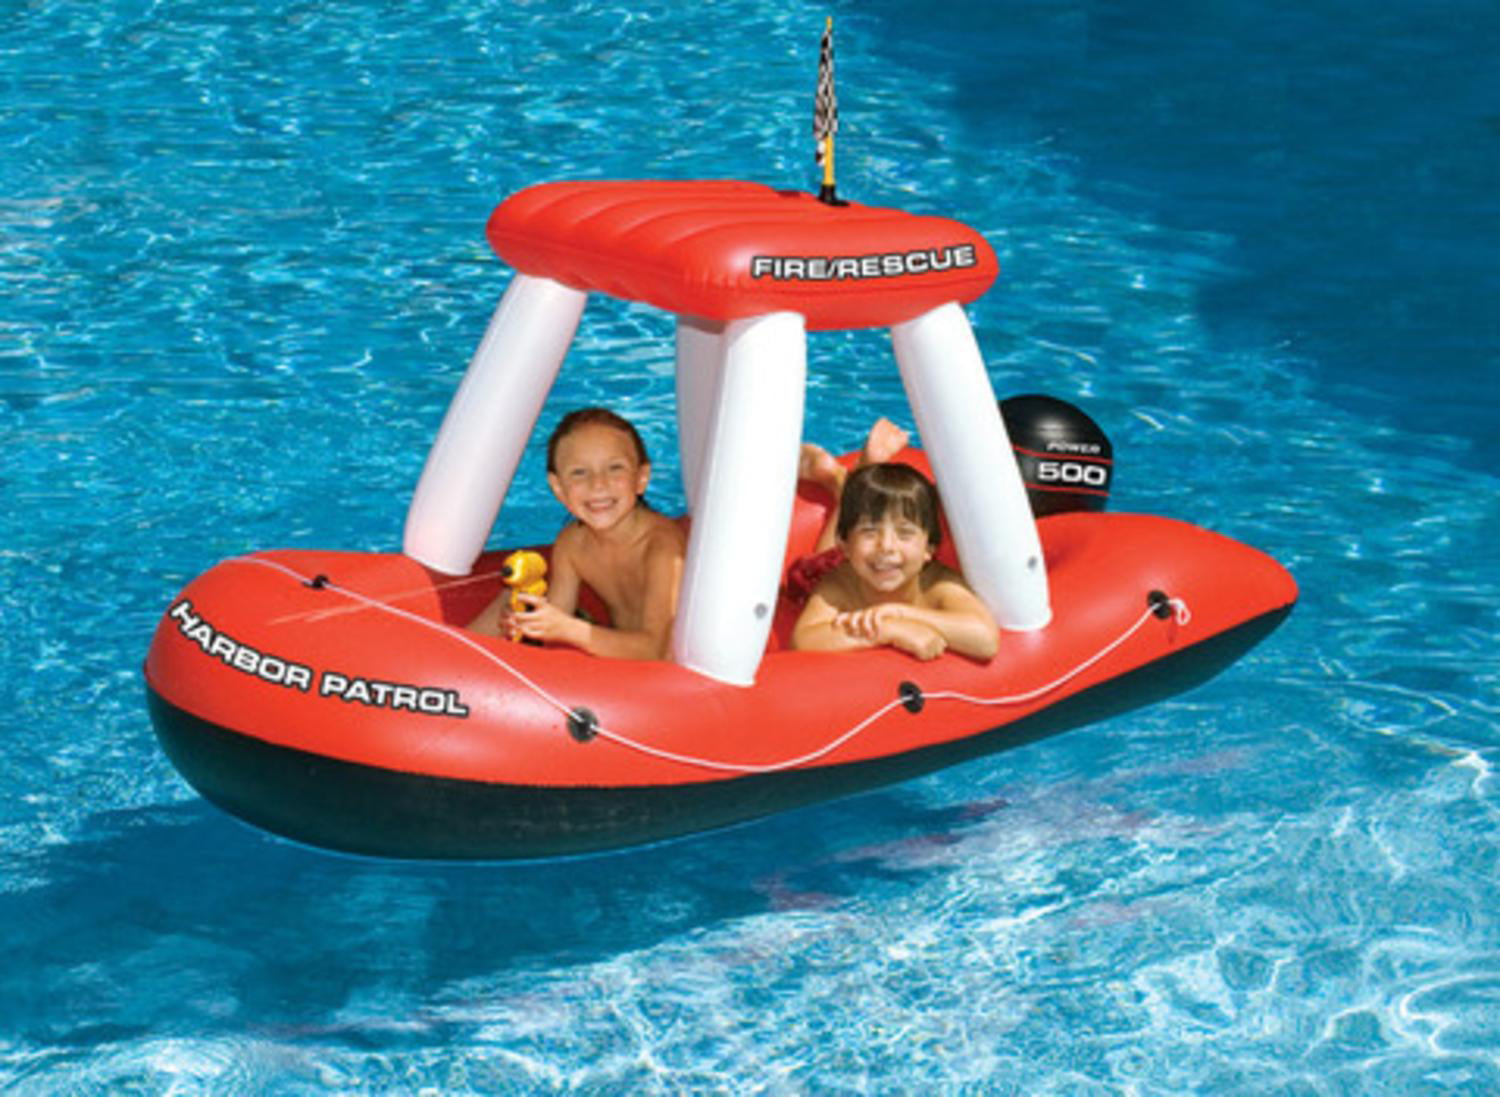 60 Fire Boat Inflatable Ride On Water Squirter Swimming Pool Toy 